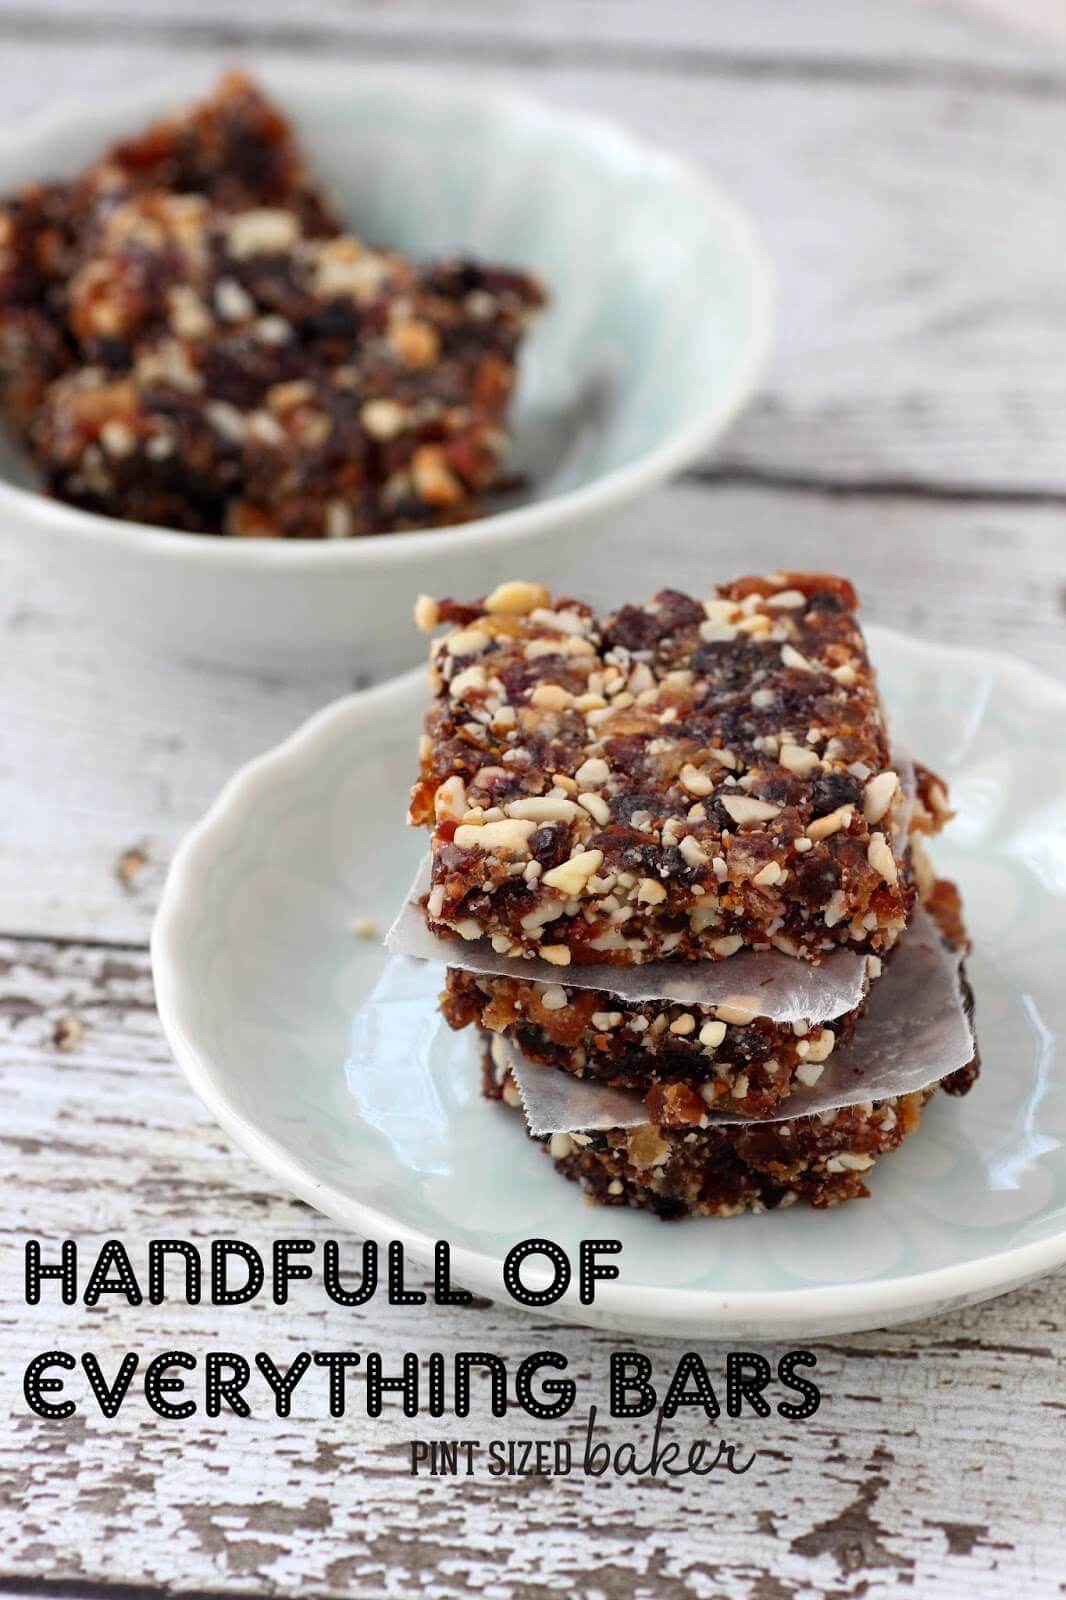 Dried Fruit and Nut Bars